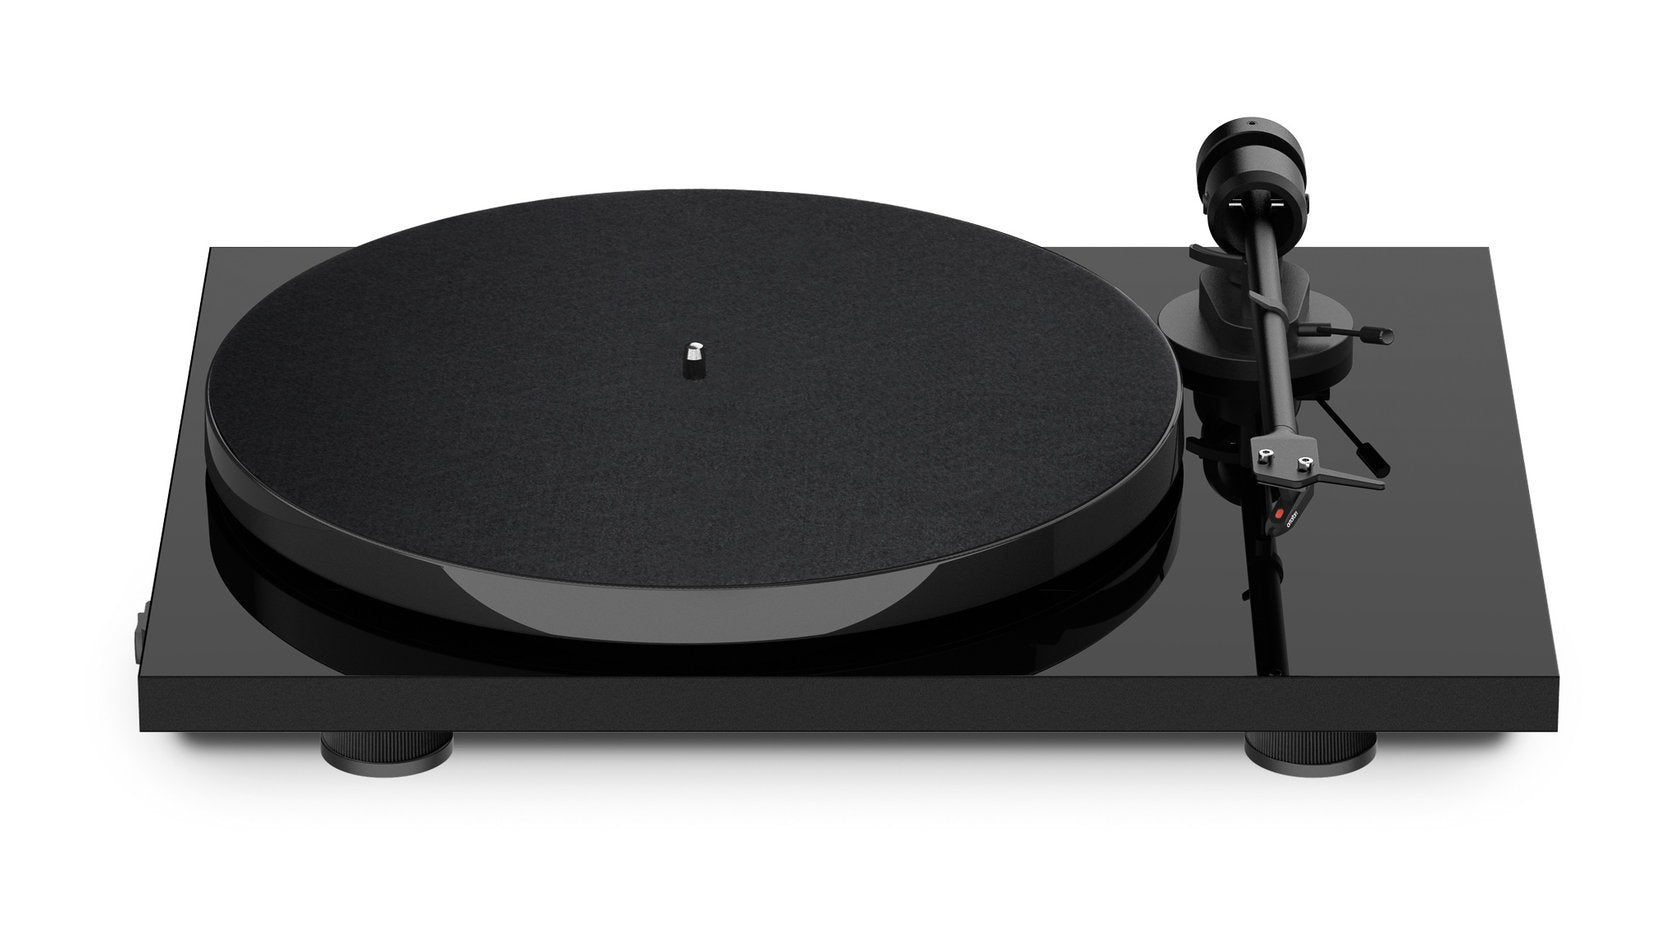 Pro-Ject E1 Phono Turntable